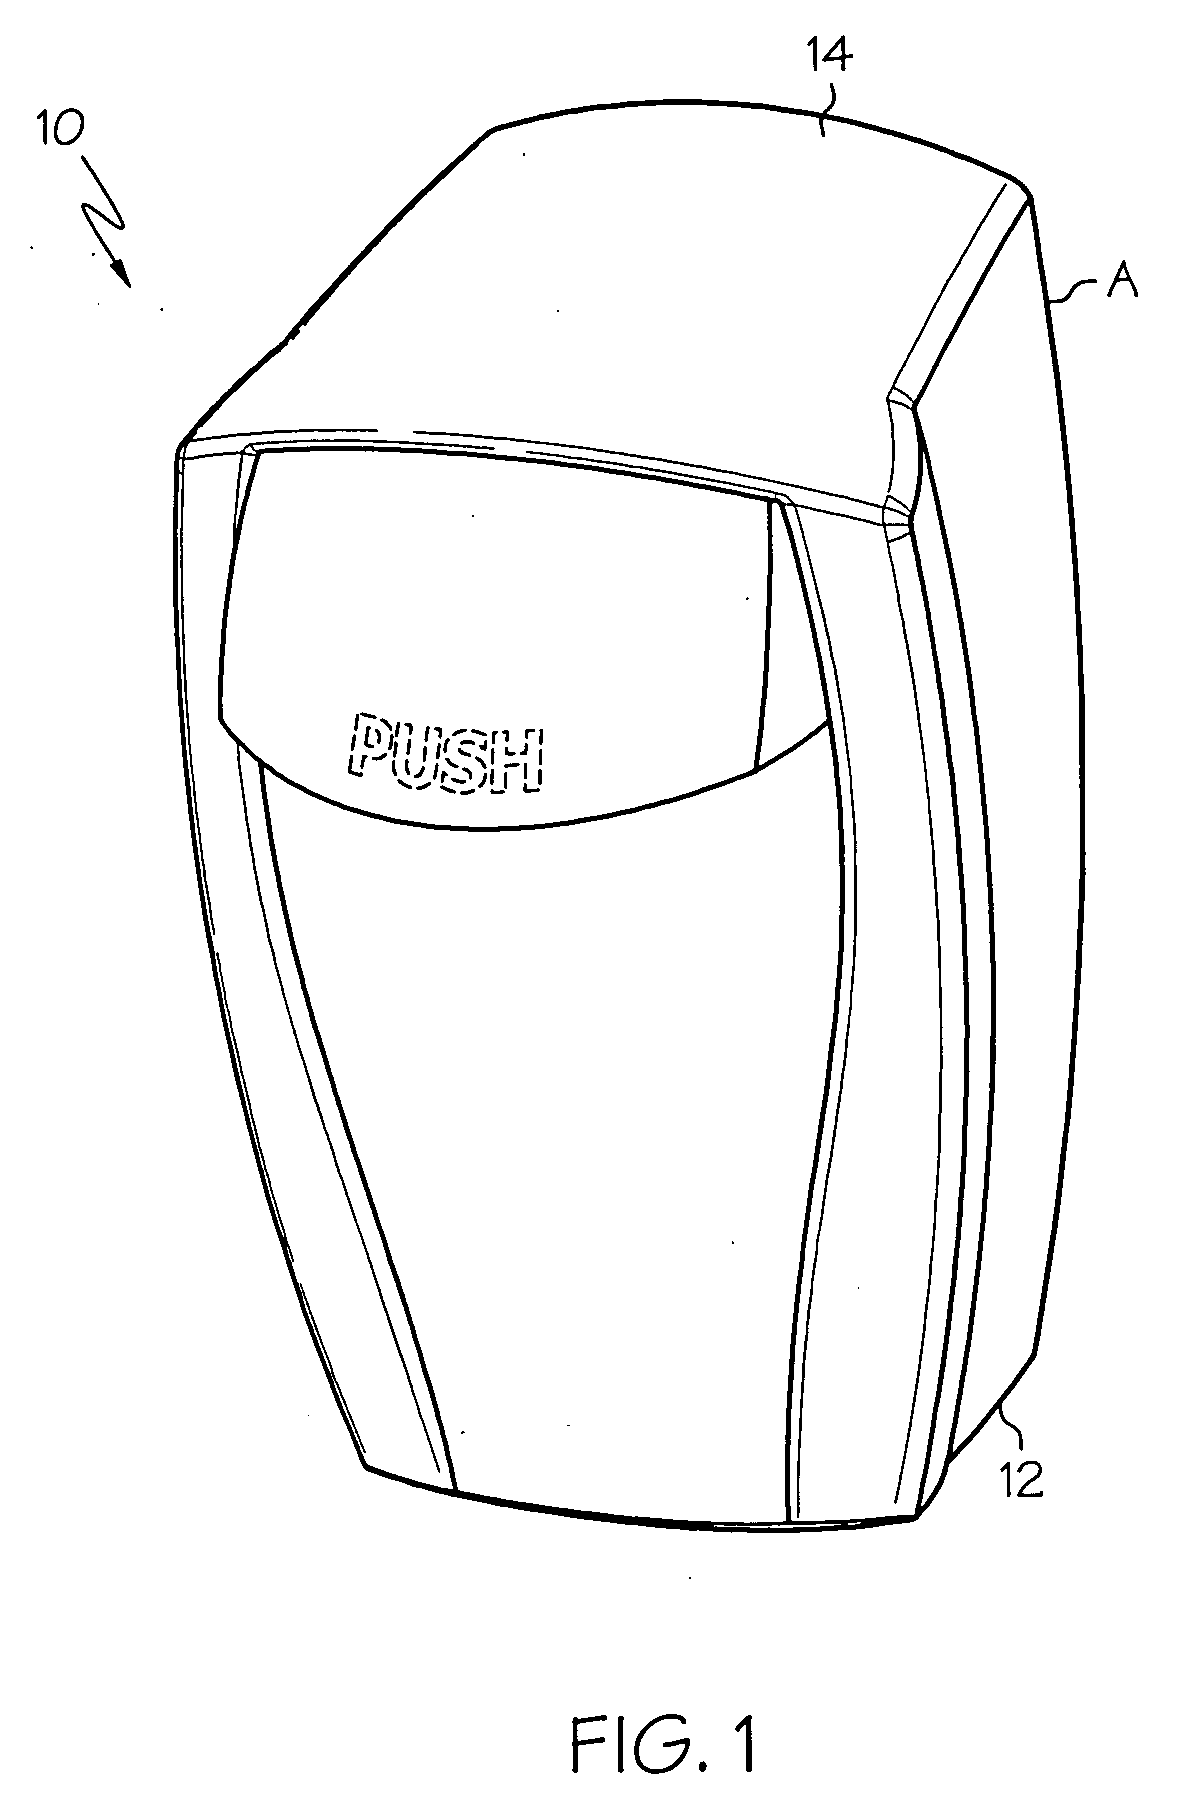 Refillable product dispenser and system